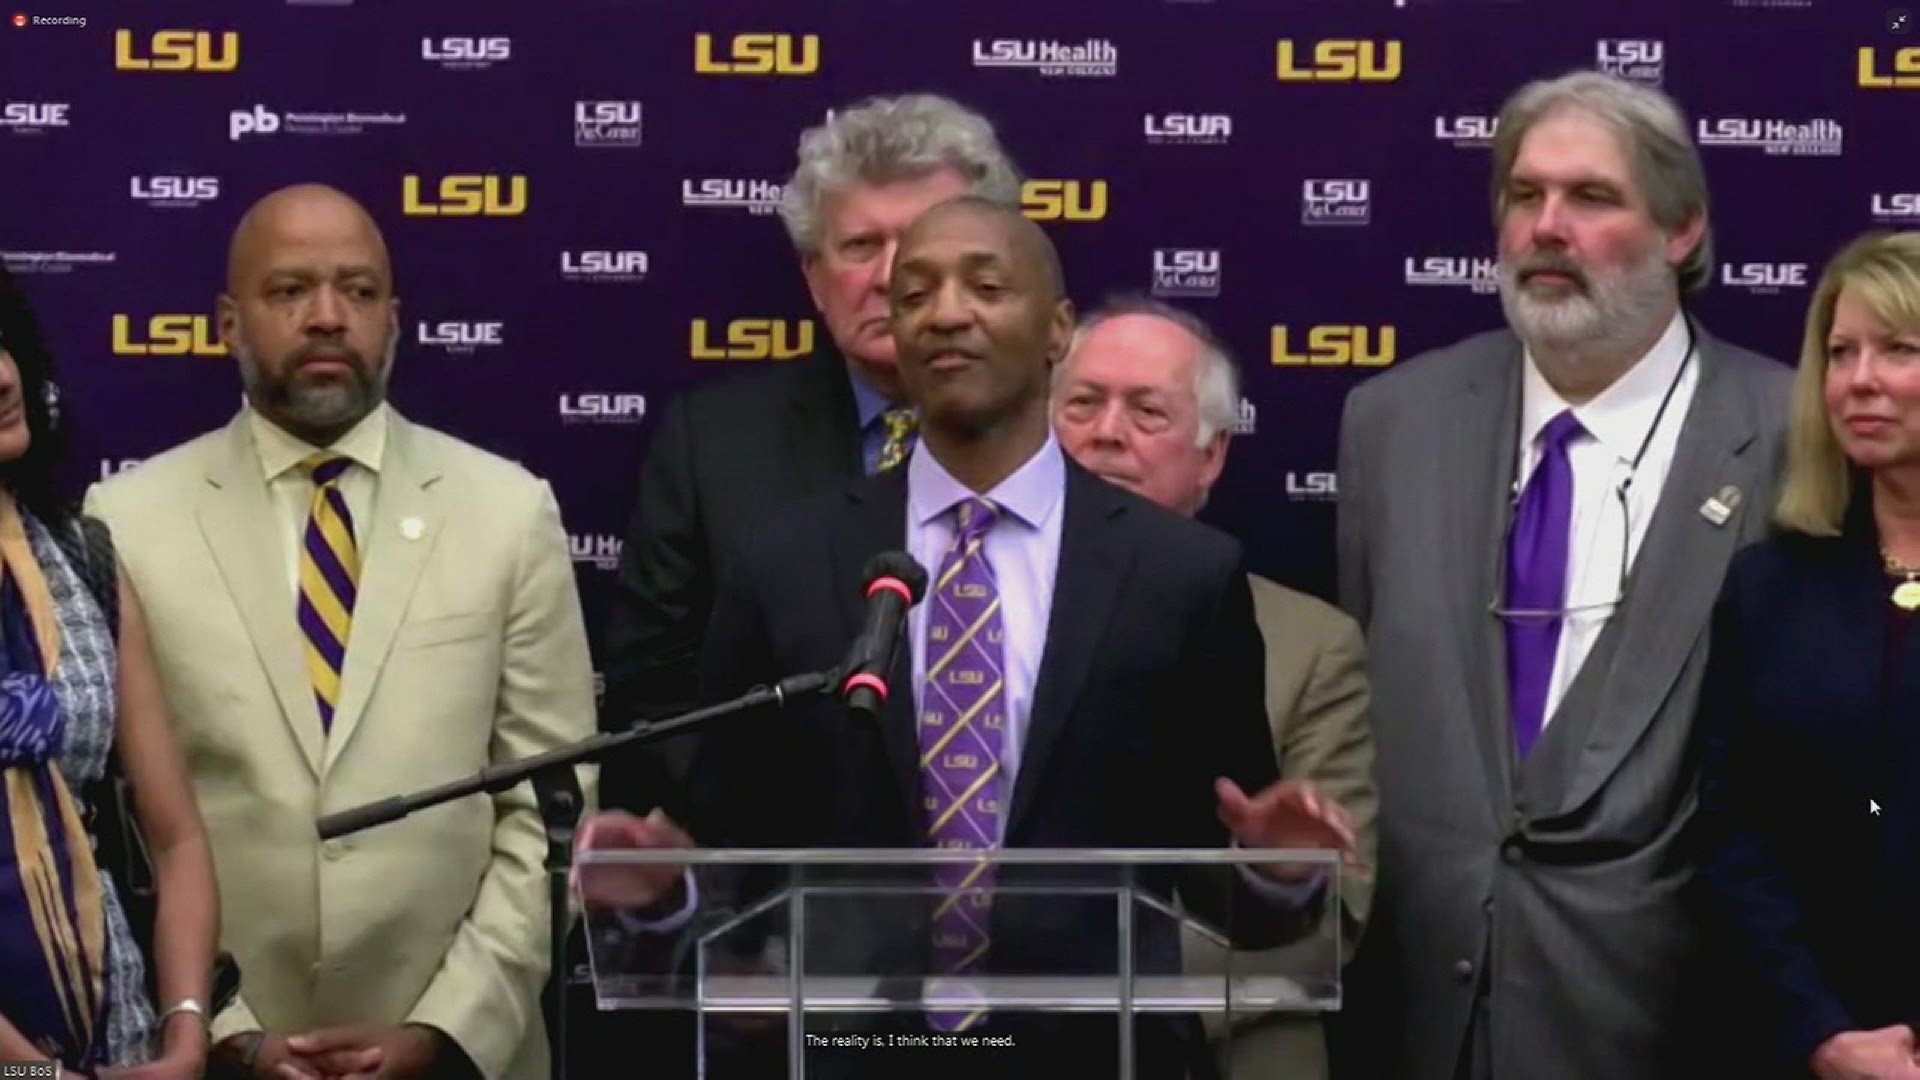 At LSU he will be in charge of two four-year universities, one two-year institution, two medical schools, a law school and several other institutions in the system.